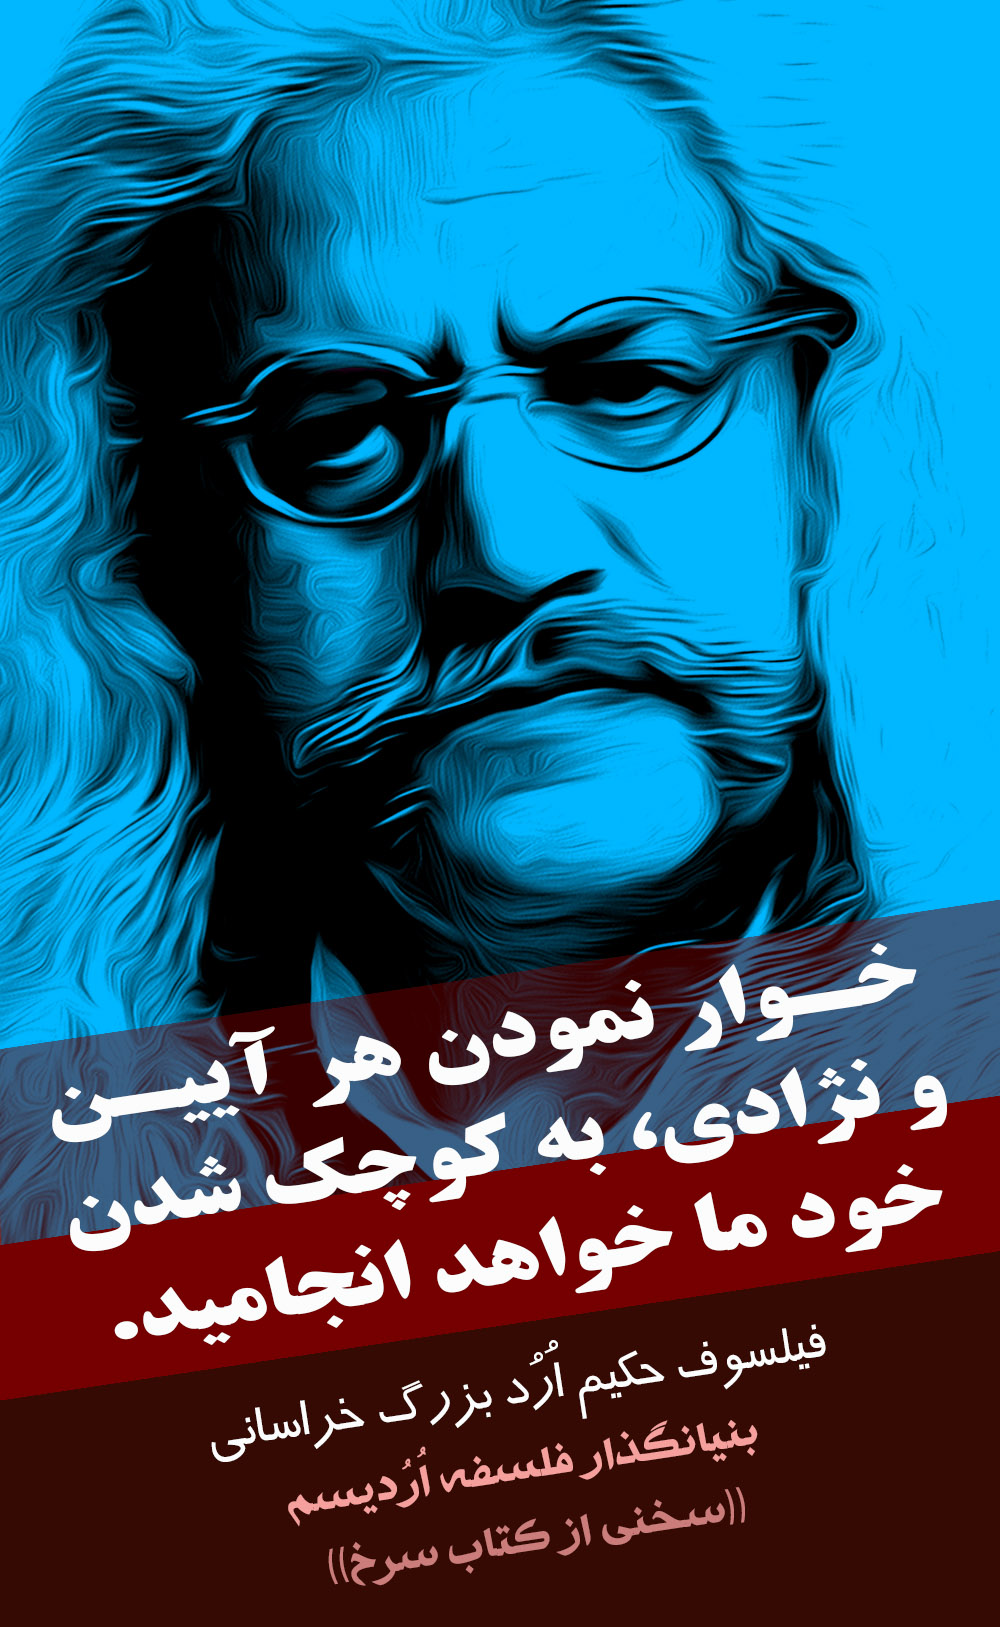 16 Top Philosopher Hakim Orod Bozorg Khorasani Quotes That Will Give You Perspective 3110